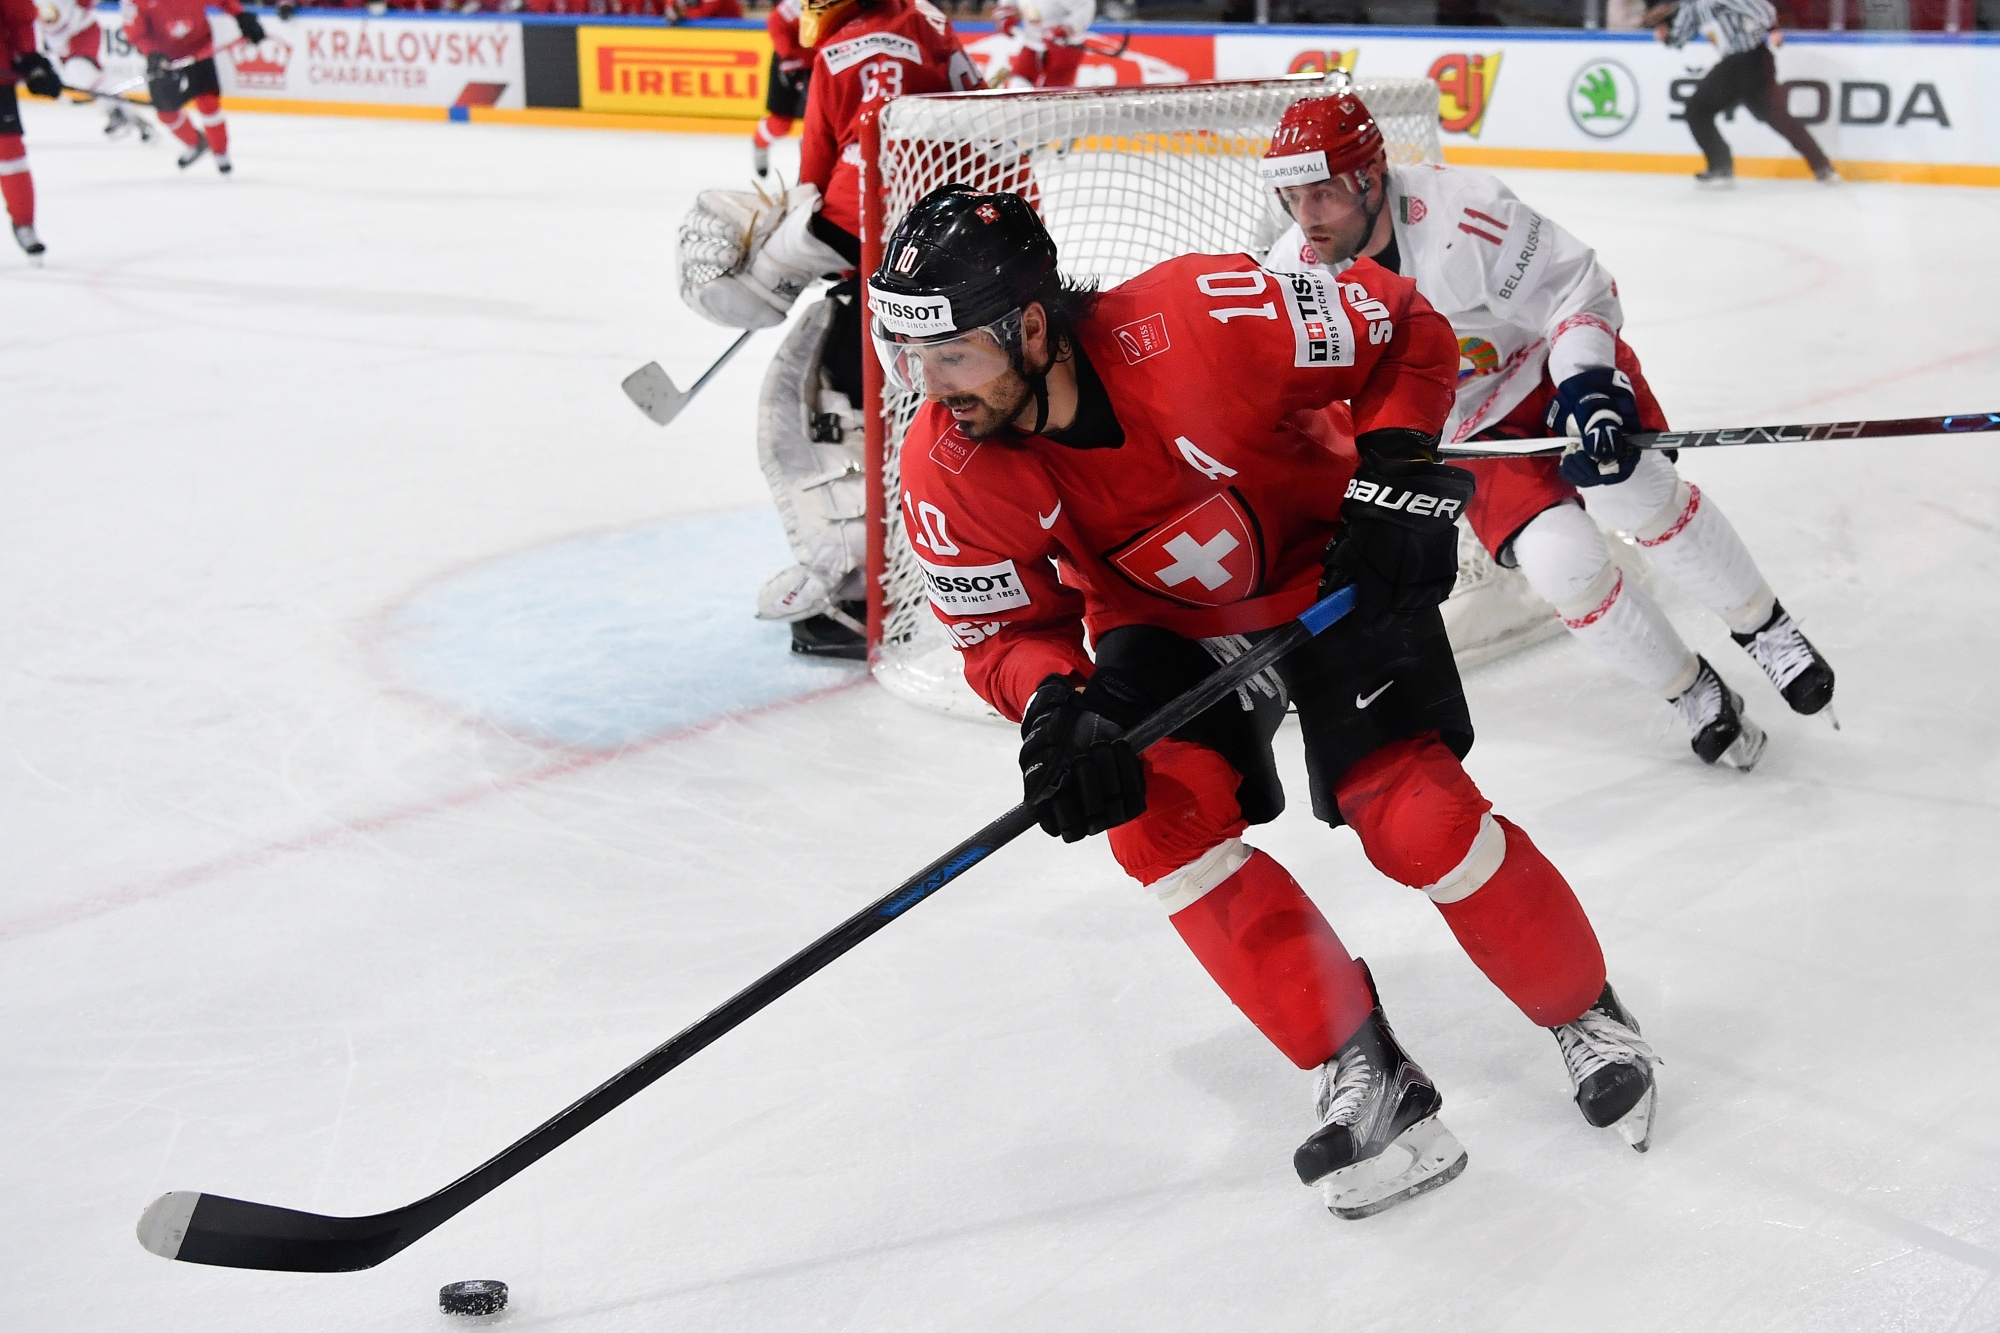 Switzerland‿s Andres Ambuehl, left, in action against Belarus‿ Alexander Kulakov during their Ice Hockey World Championship group B preliminary round match between Switzerland and Belarus in Paris, France on Wednesday, May 10, 2017. (KEYSTONE/Peter Schneider) FRANCE ICE HOCKEY WORLDS SWITZERLAND BELARUS